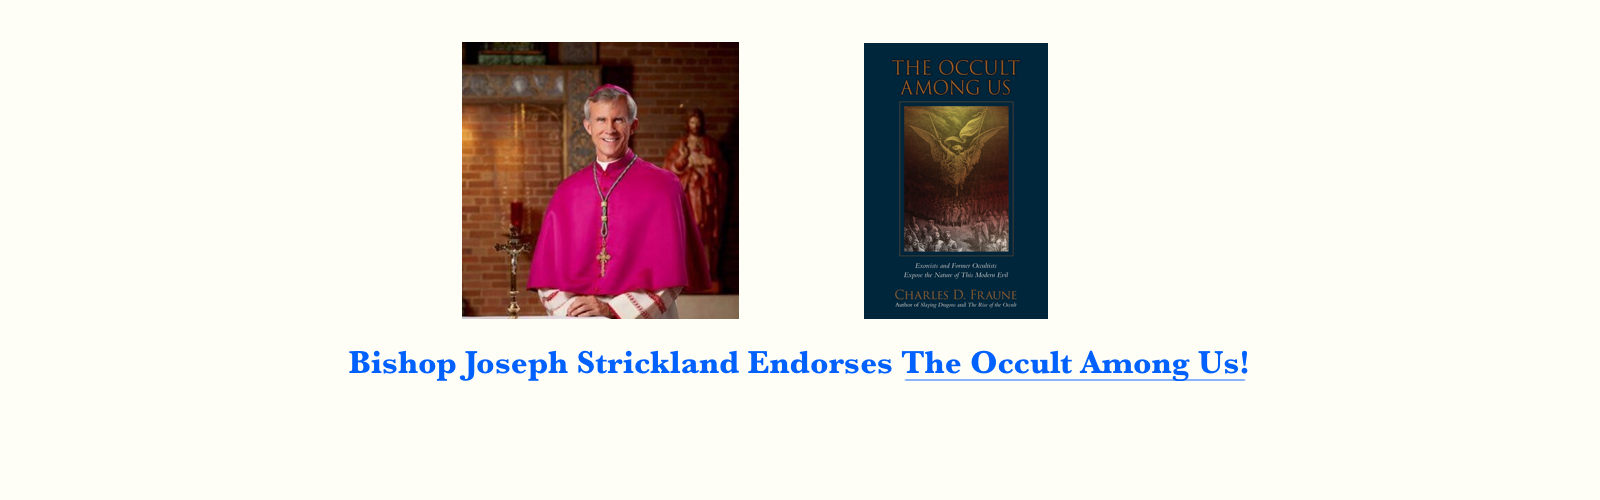 Bishop Joseph Strickland Endorses new book - "The Occult Among Us"!